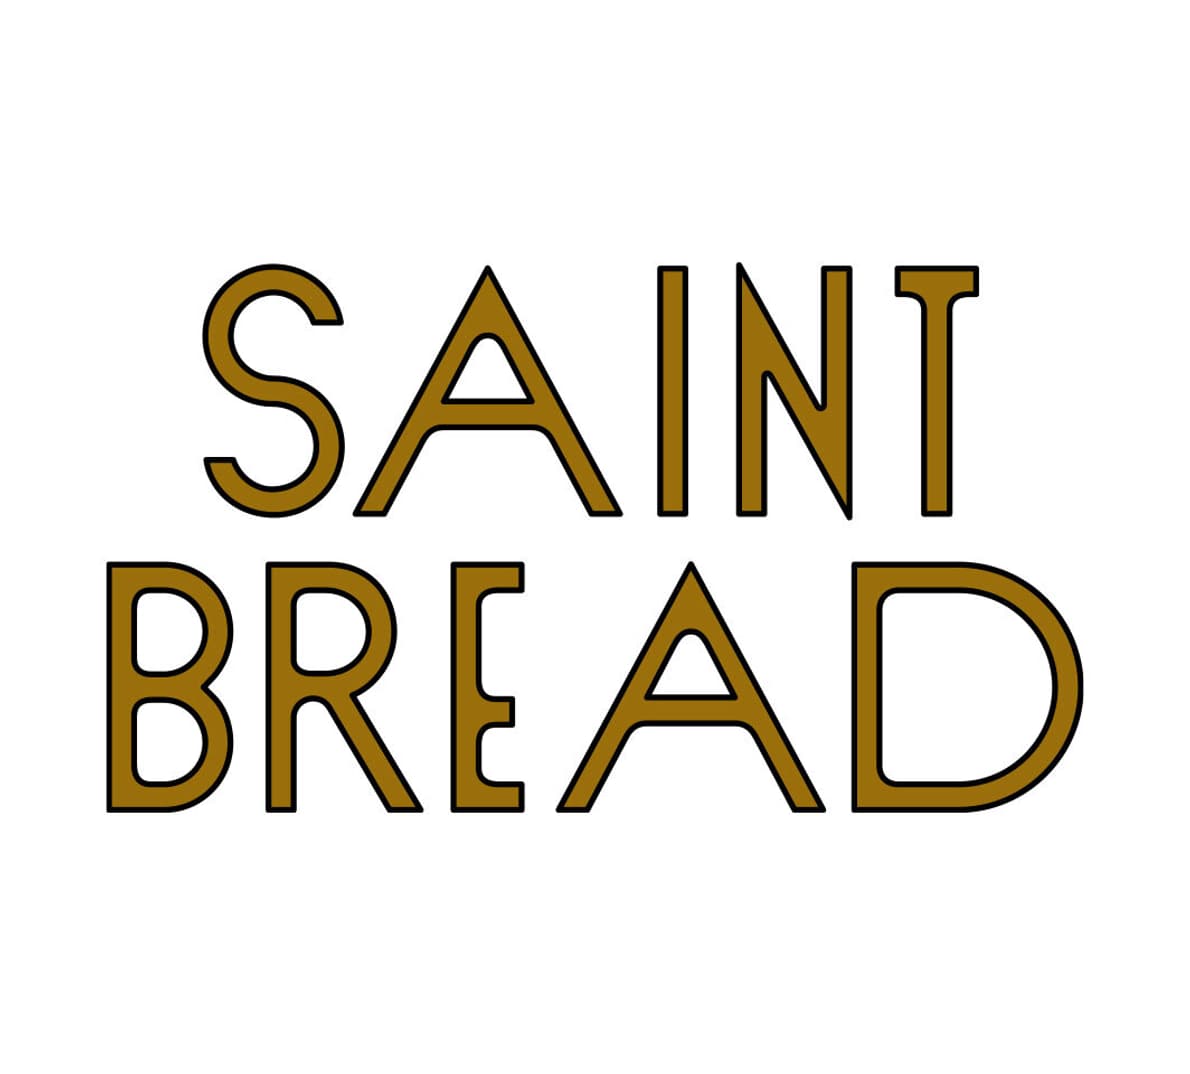 The Saint Bread logo stacked with a black outline and gold fill.